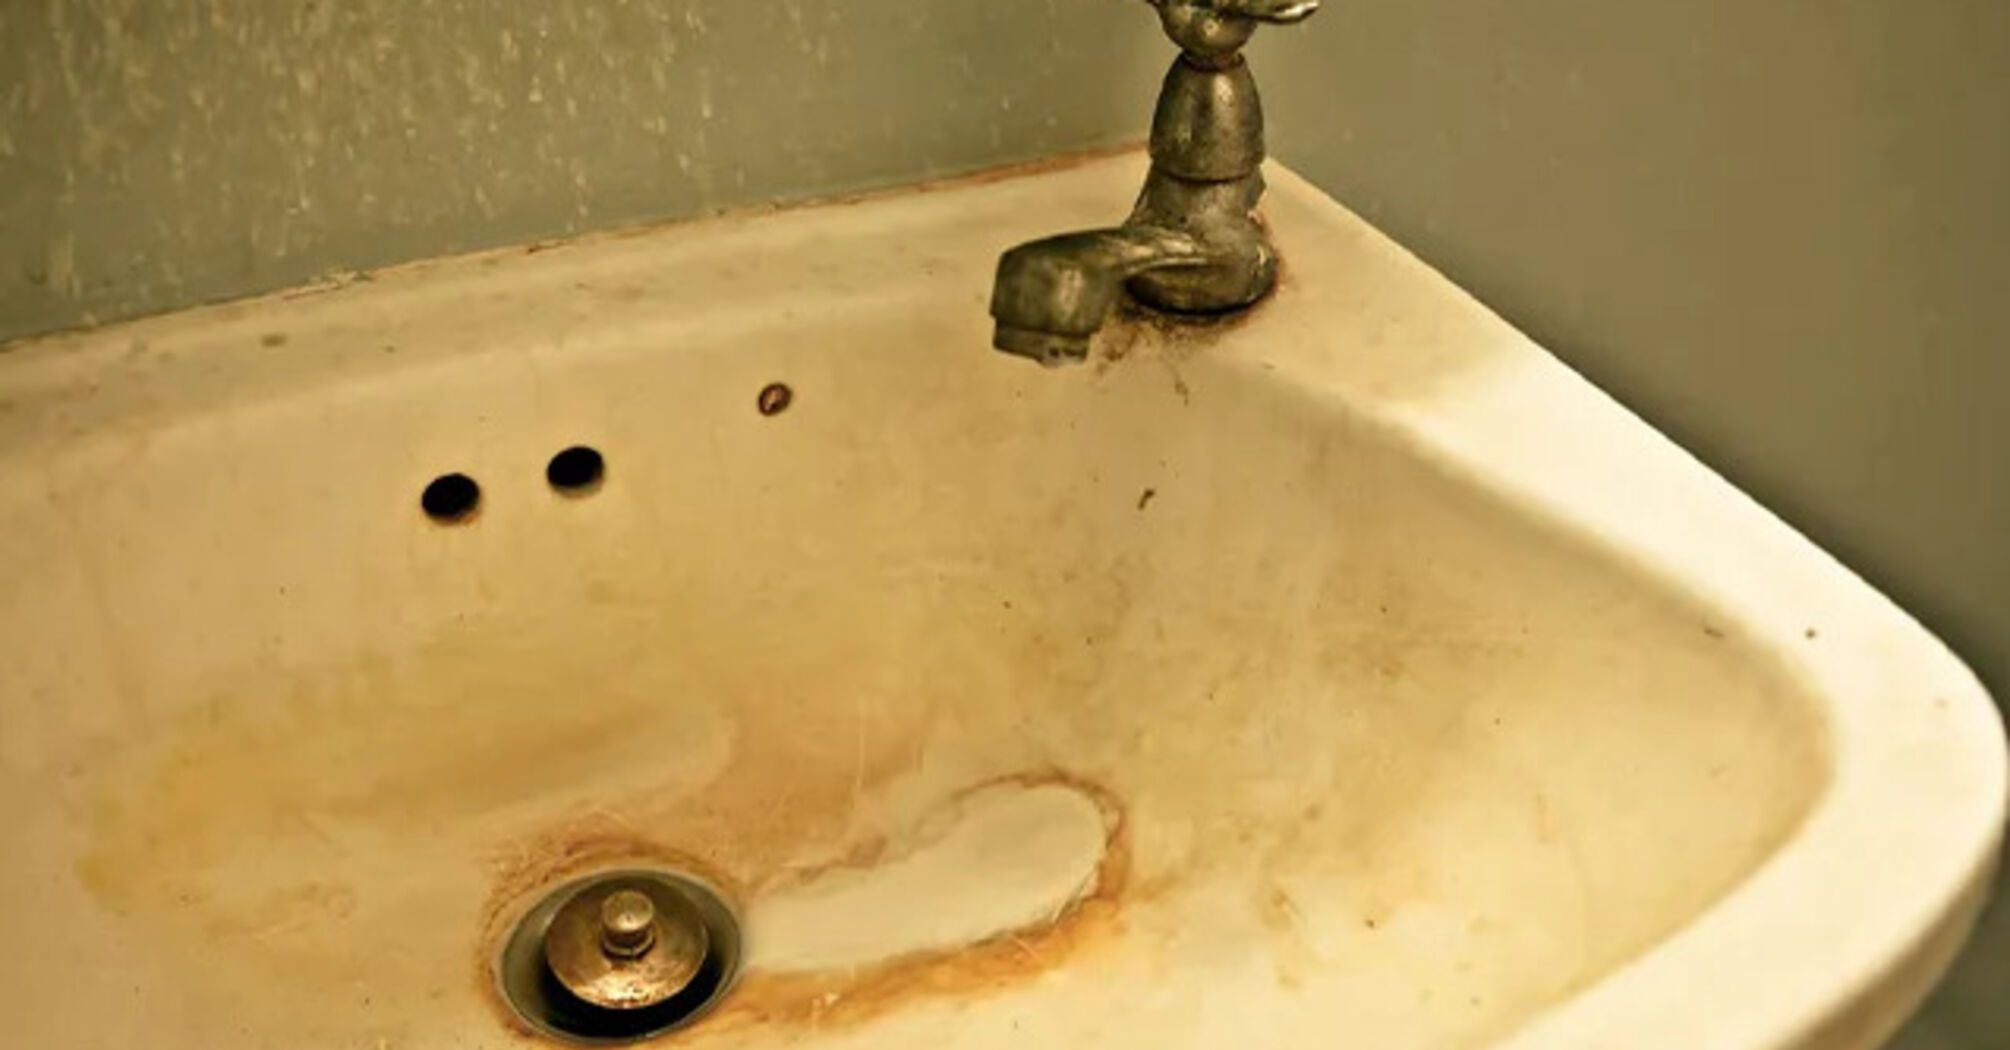 How to remove yellow scale on the sink